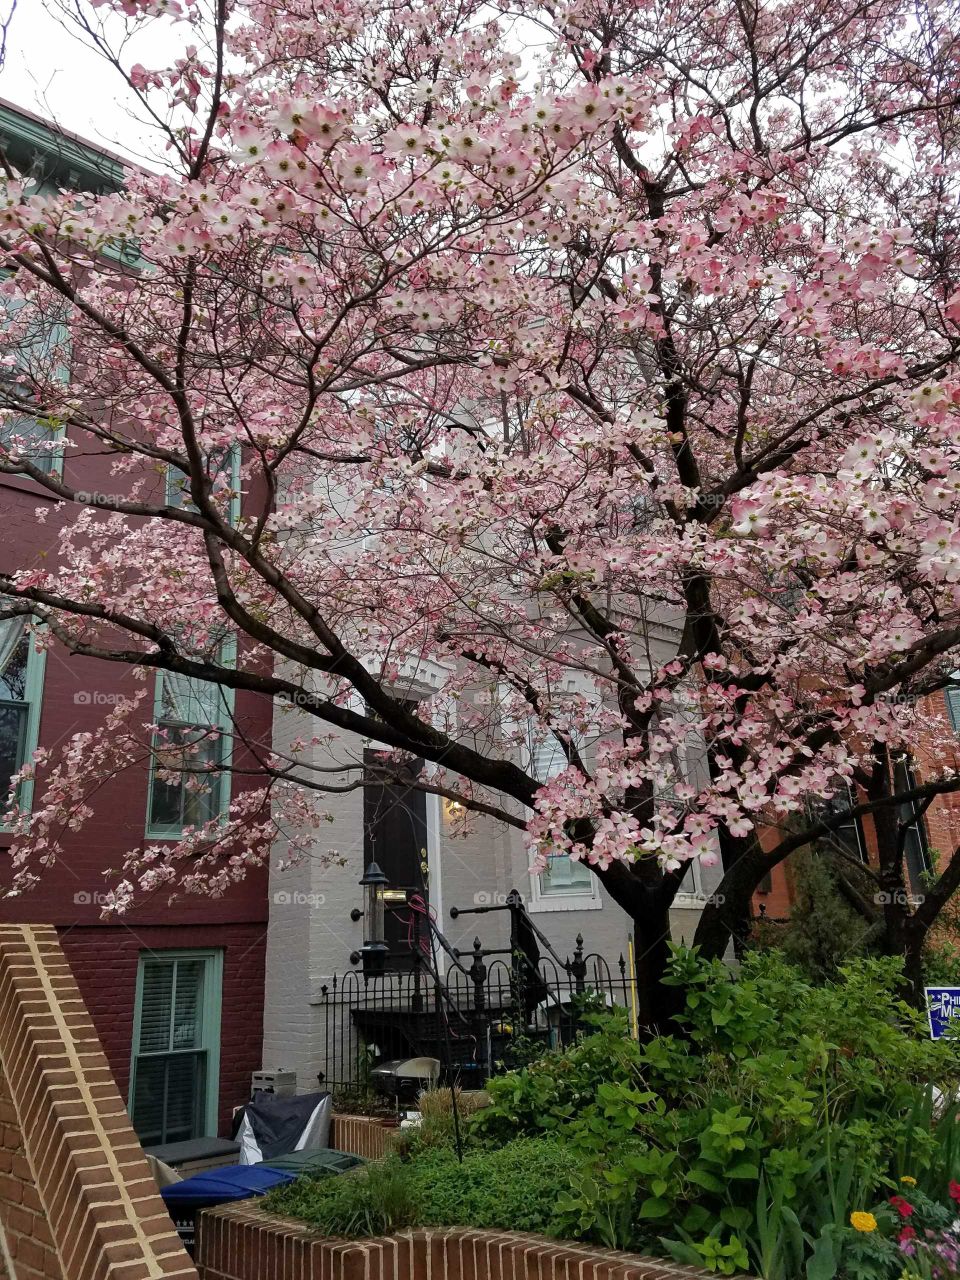 A tree in bloom in front of a historic home in the Capitol Hill neighborhood of Washington, DC. Photo taken April 2018.